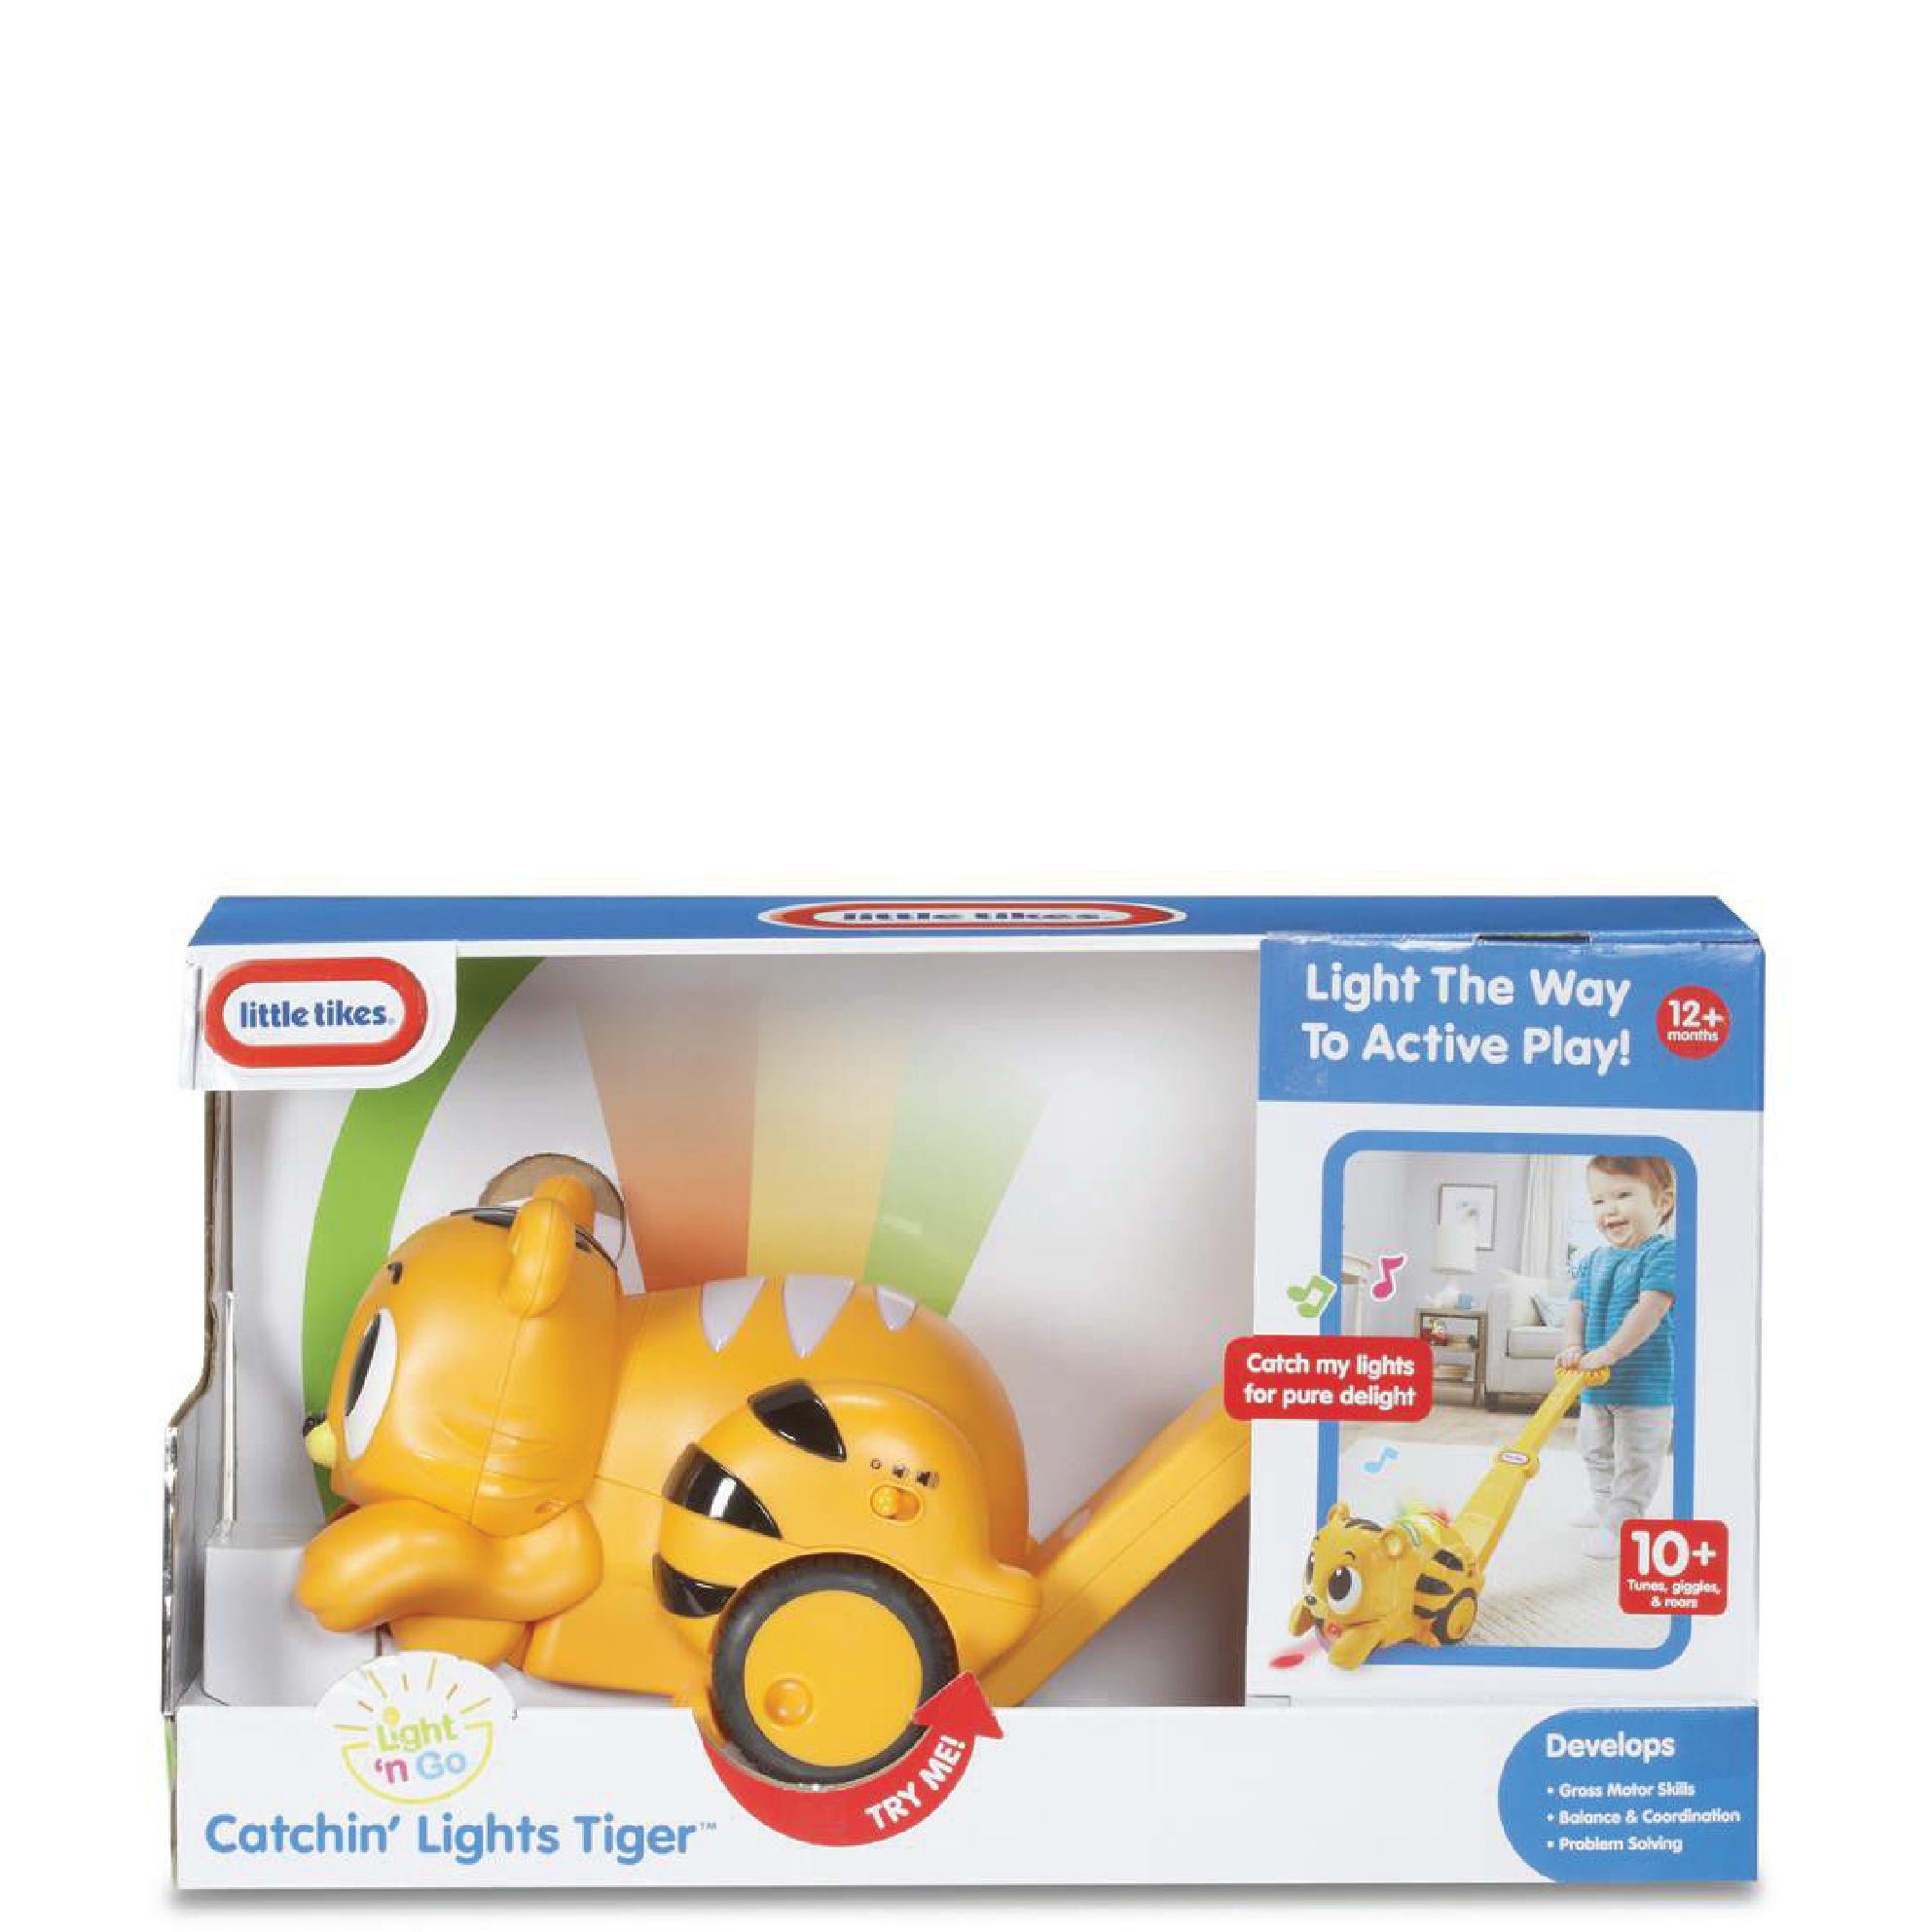 Little Tikes Catch in Lights Tiger Toy